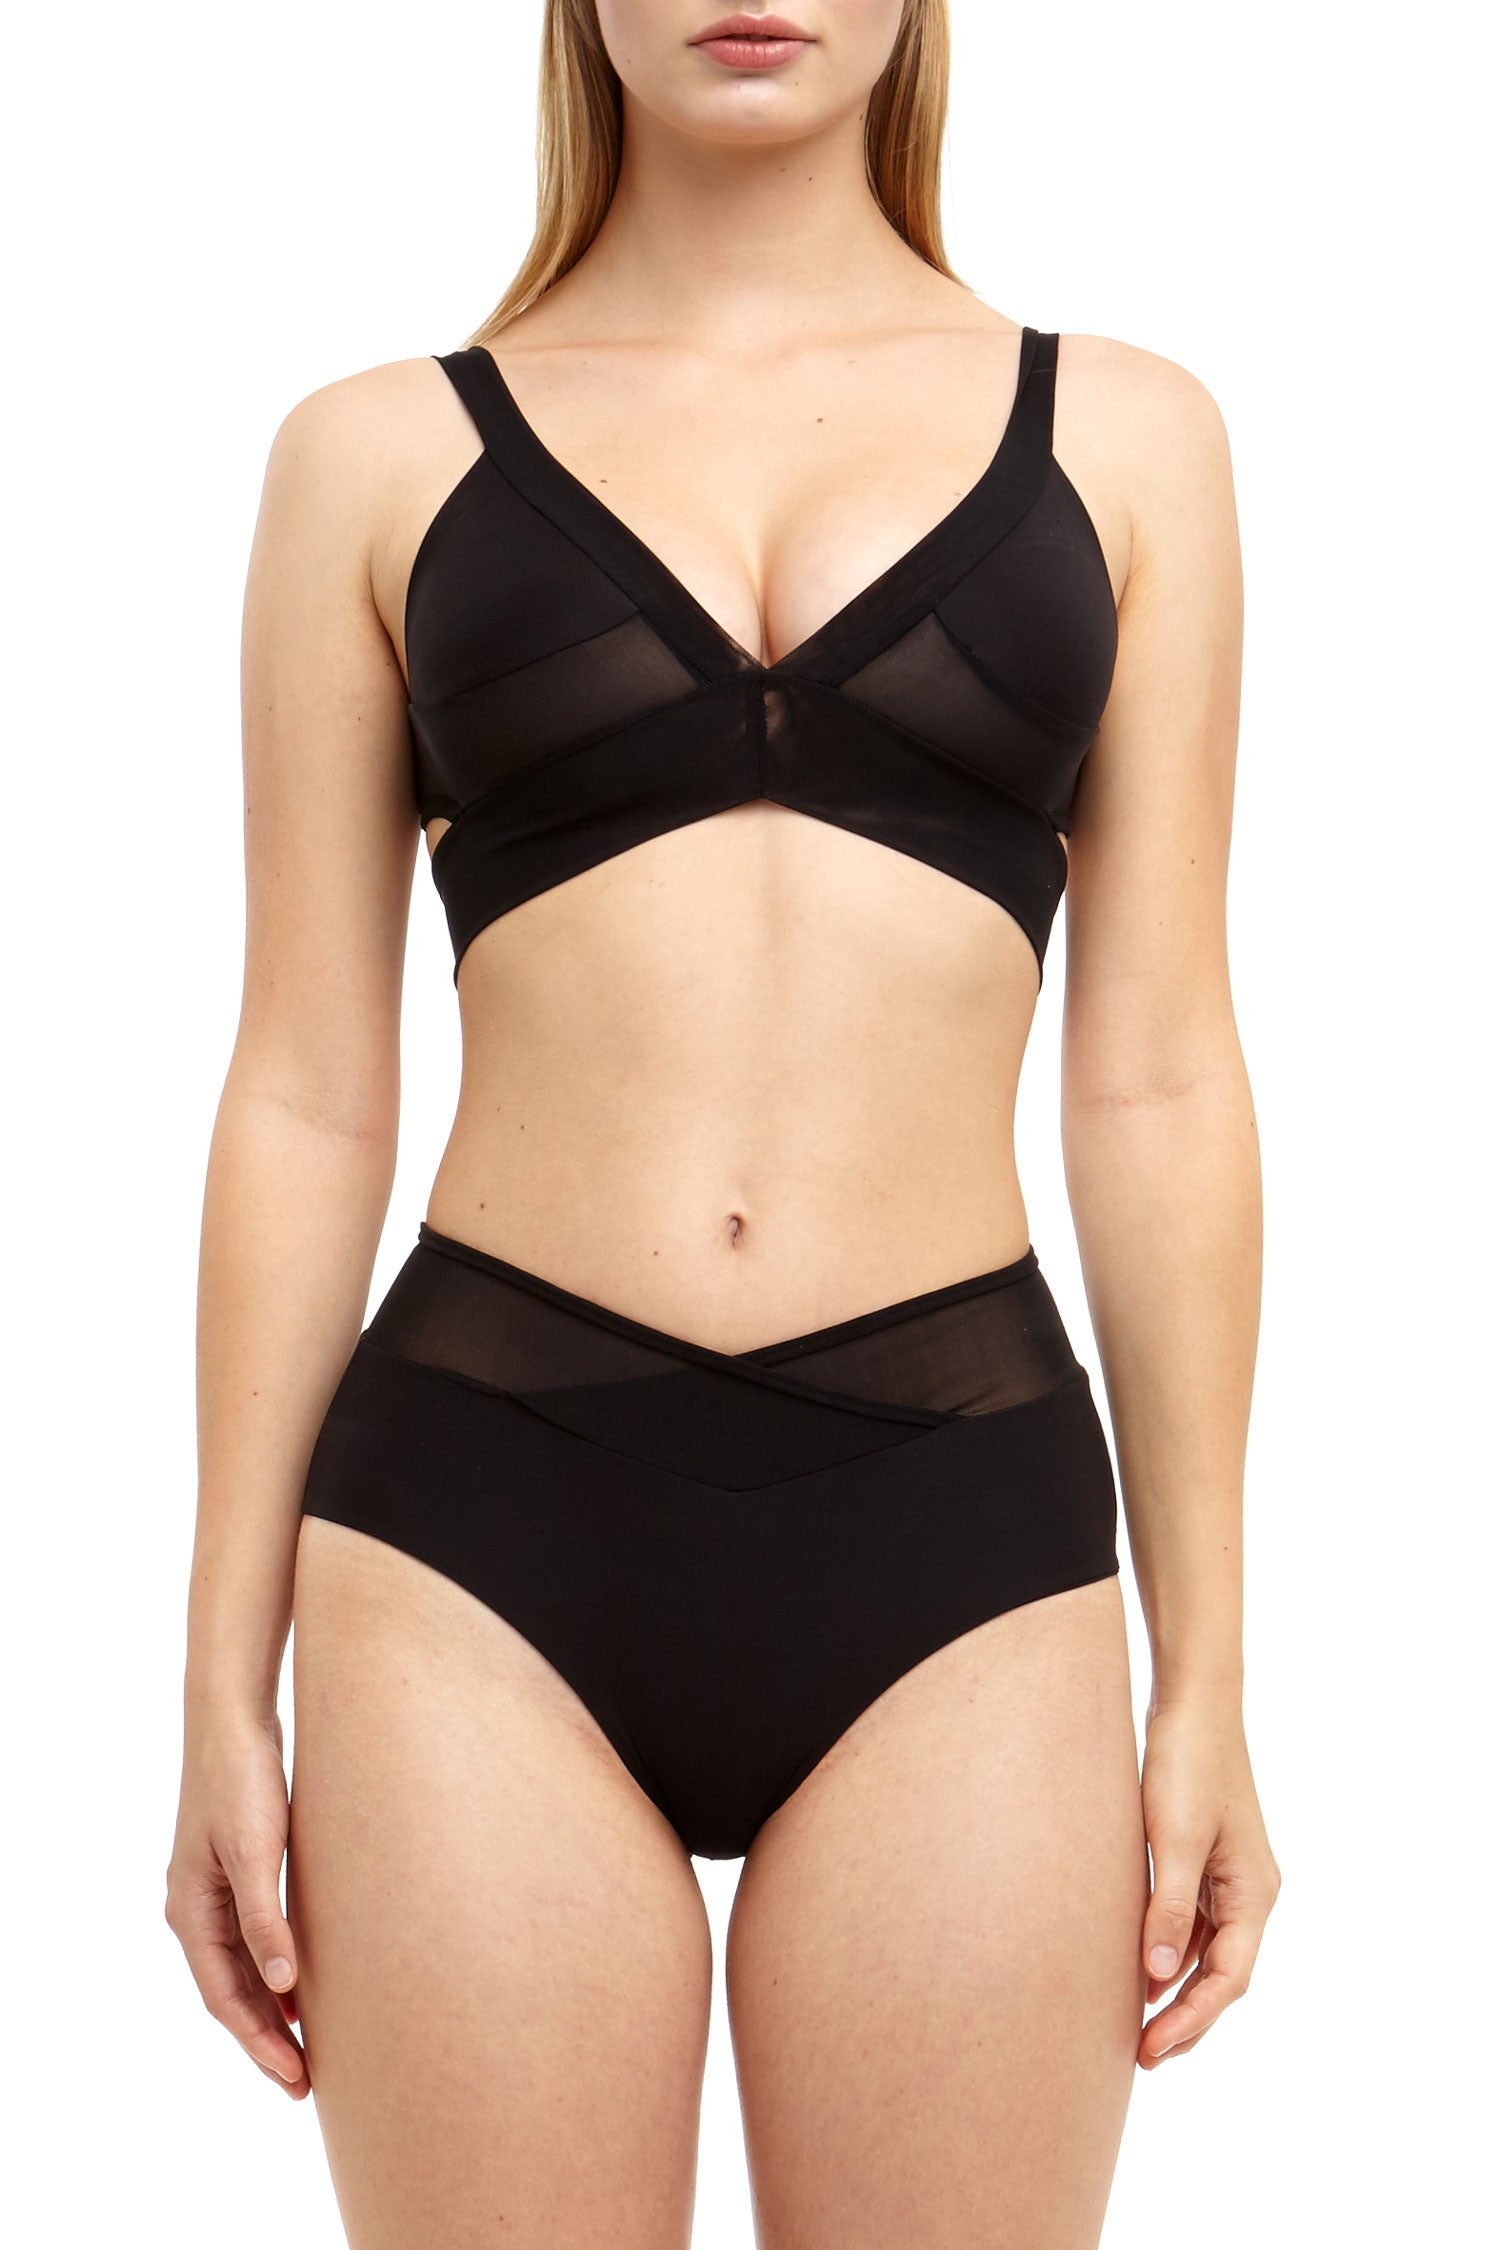 DSTM Form brief and Form bra